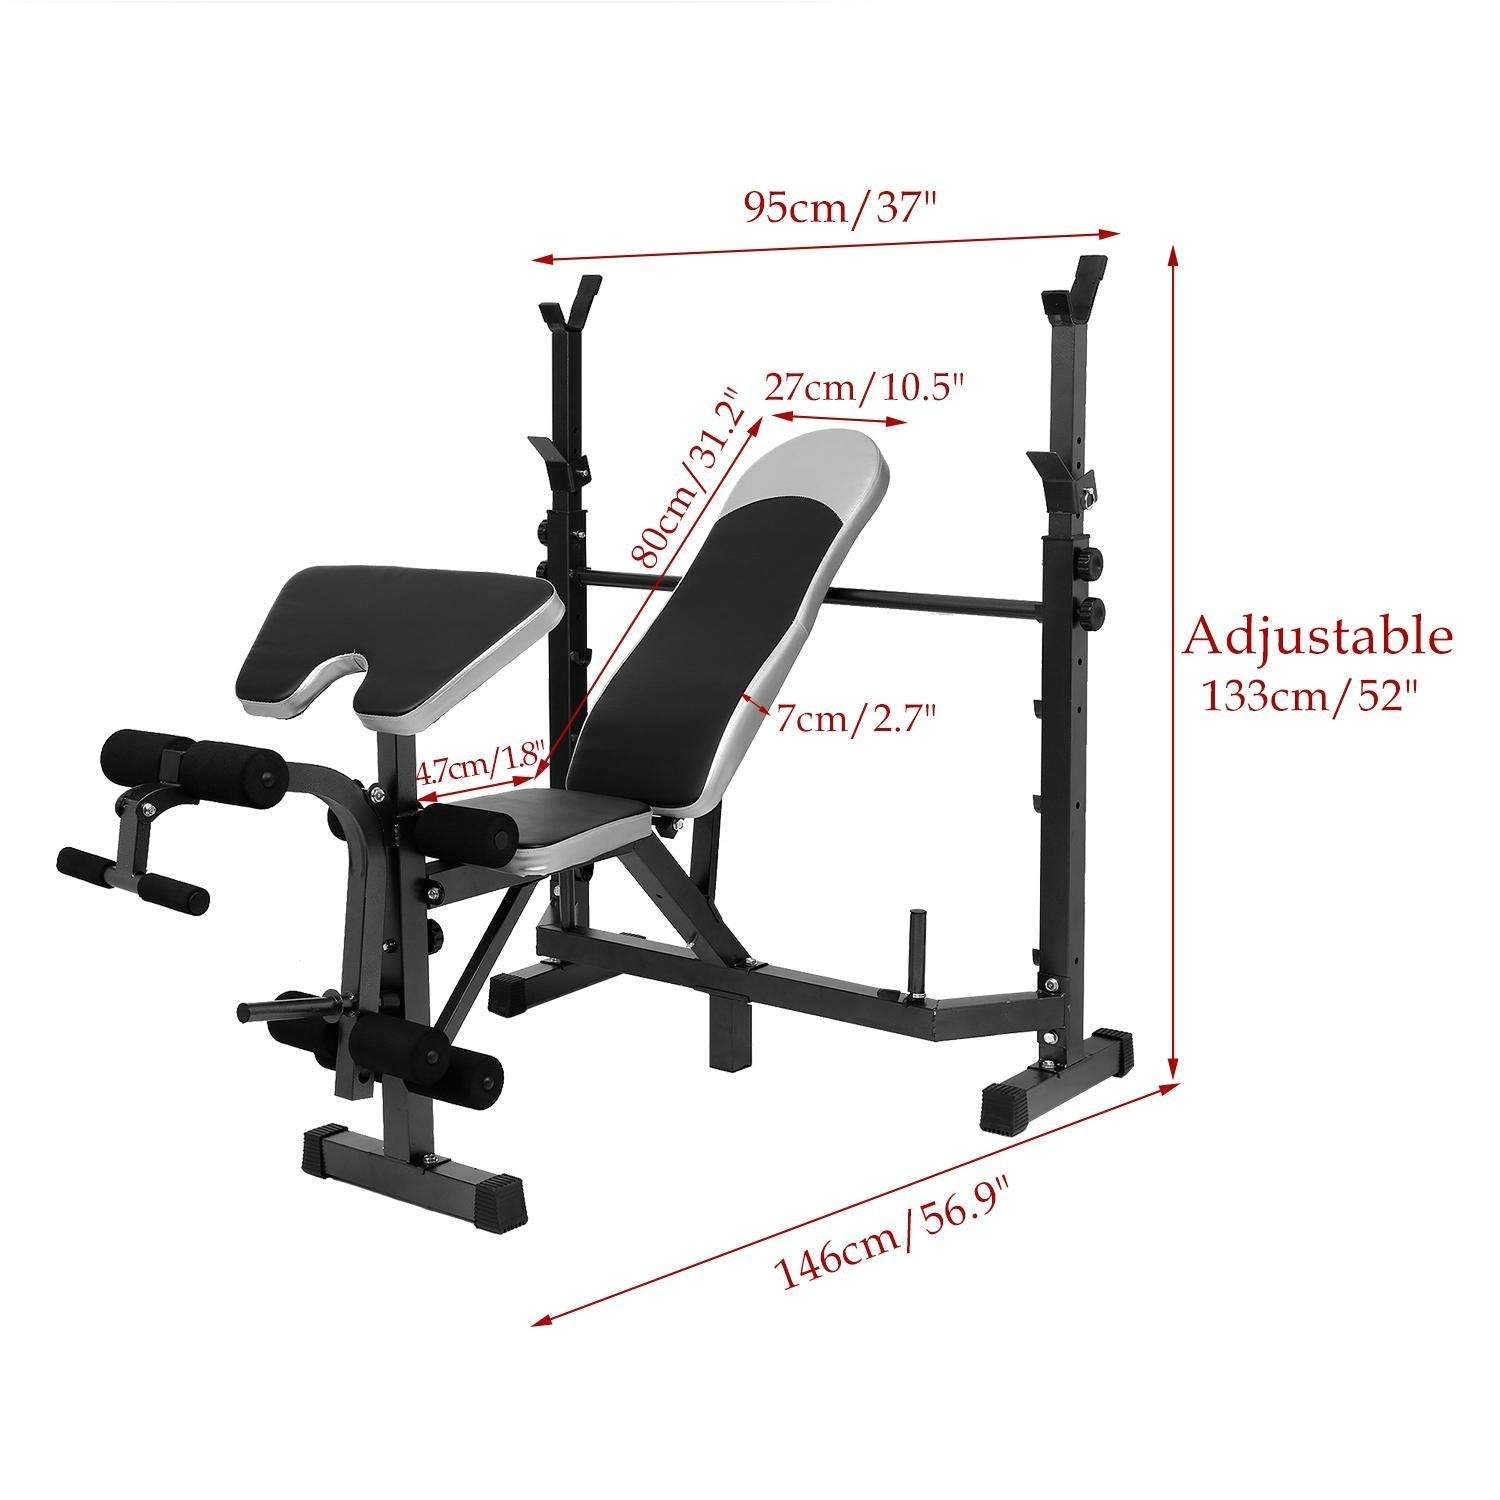 amazon com multi function olympic workout bench w adjustable squat rack robust frame bench features leg developer curl yoke preacher pad weight